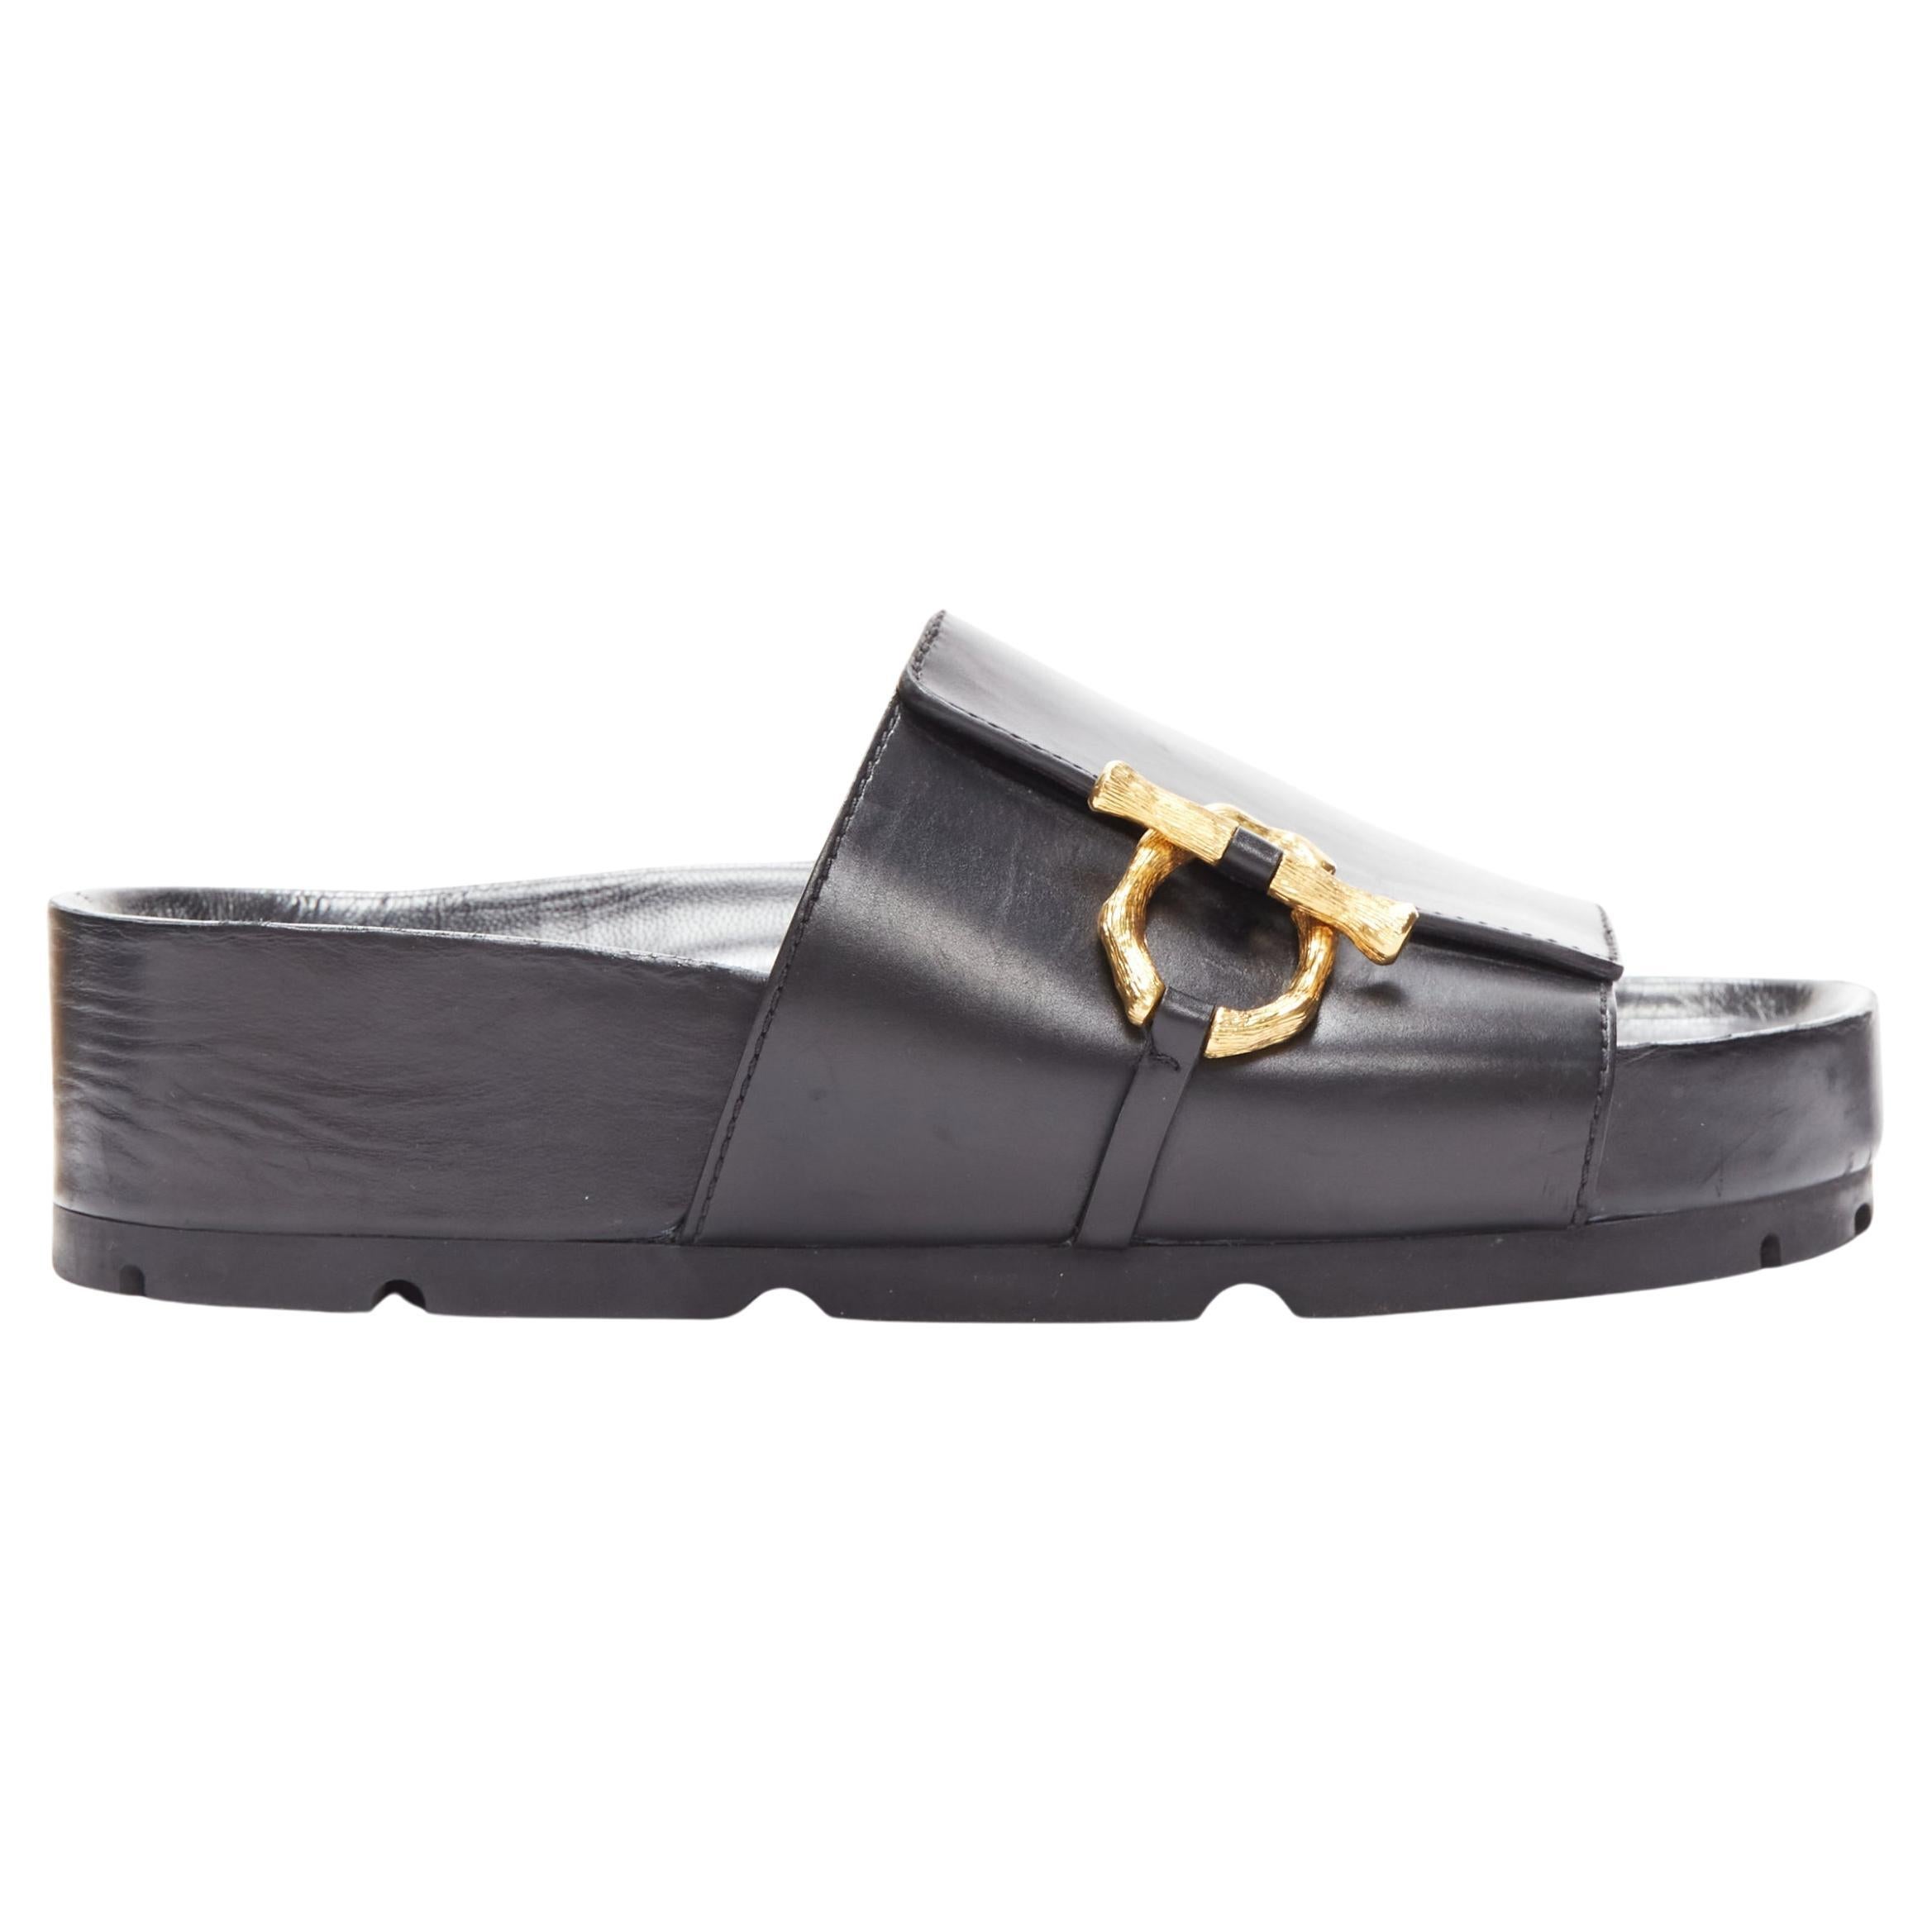 new OLD CELINE Phoebe Philo gold bamboo buckle black leather sandals EU38